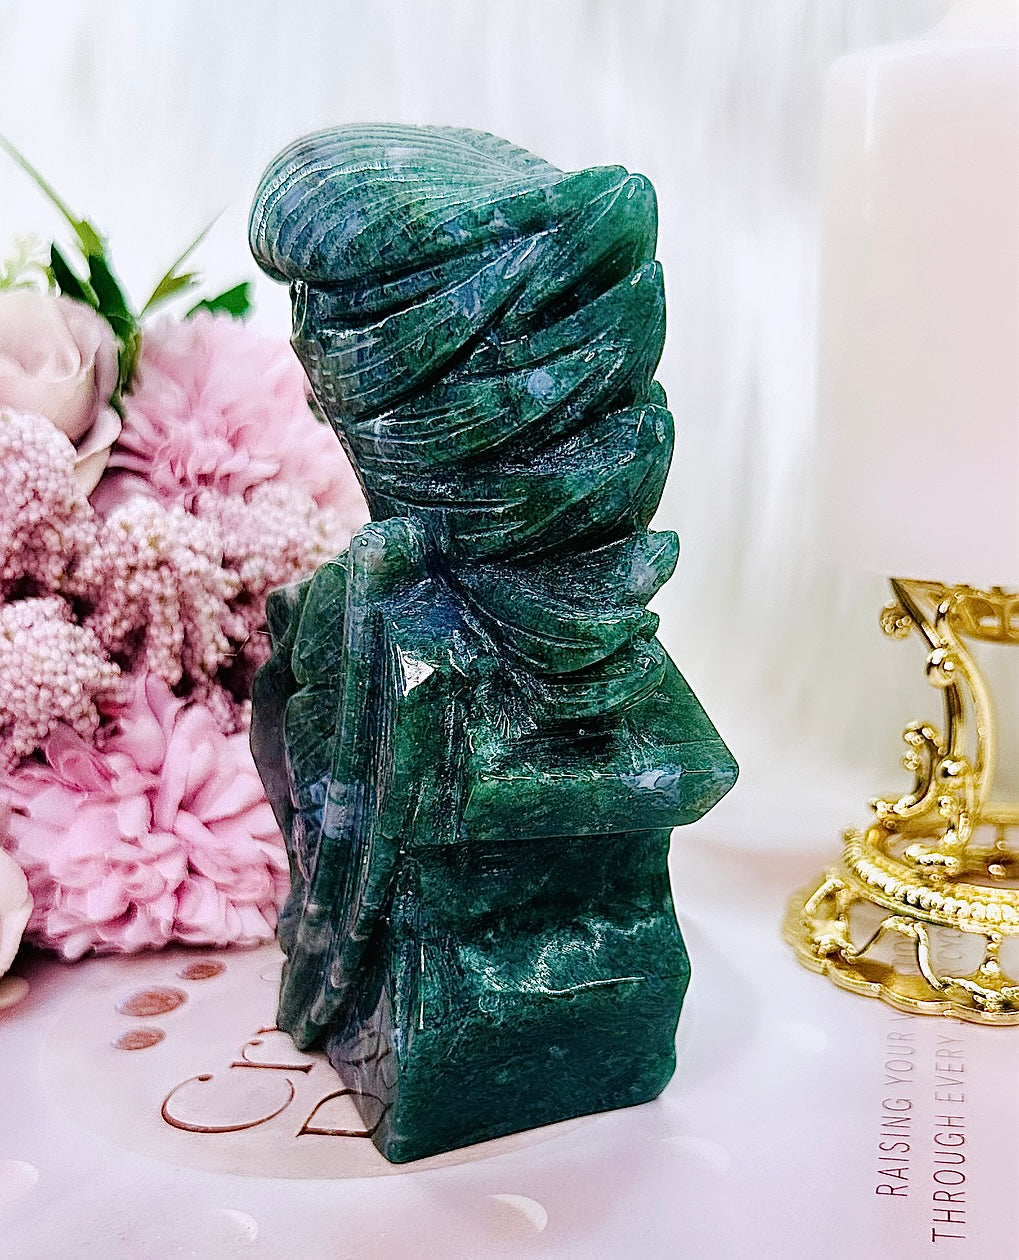 Peace & Tranquility ~ Gorgeous Large 633gram Perfectly Carved Moss Agate Eagle ~ A Divine Piece